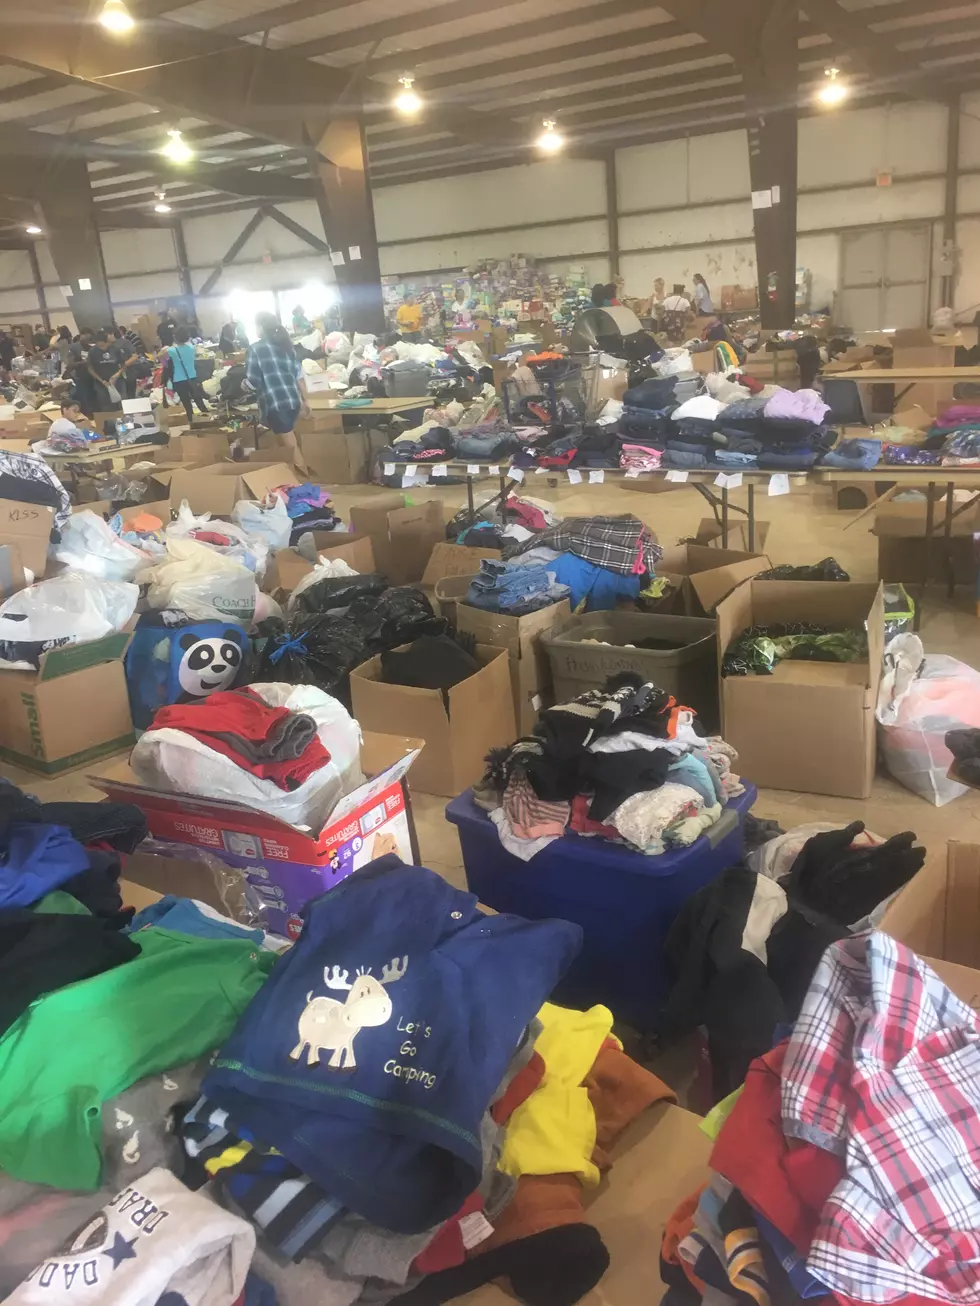 Check Out All Of The Donations Made To Killeen Special Events Center